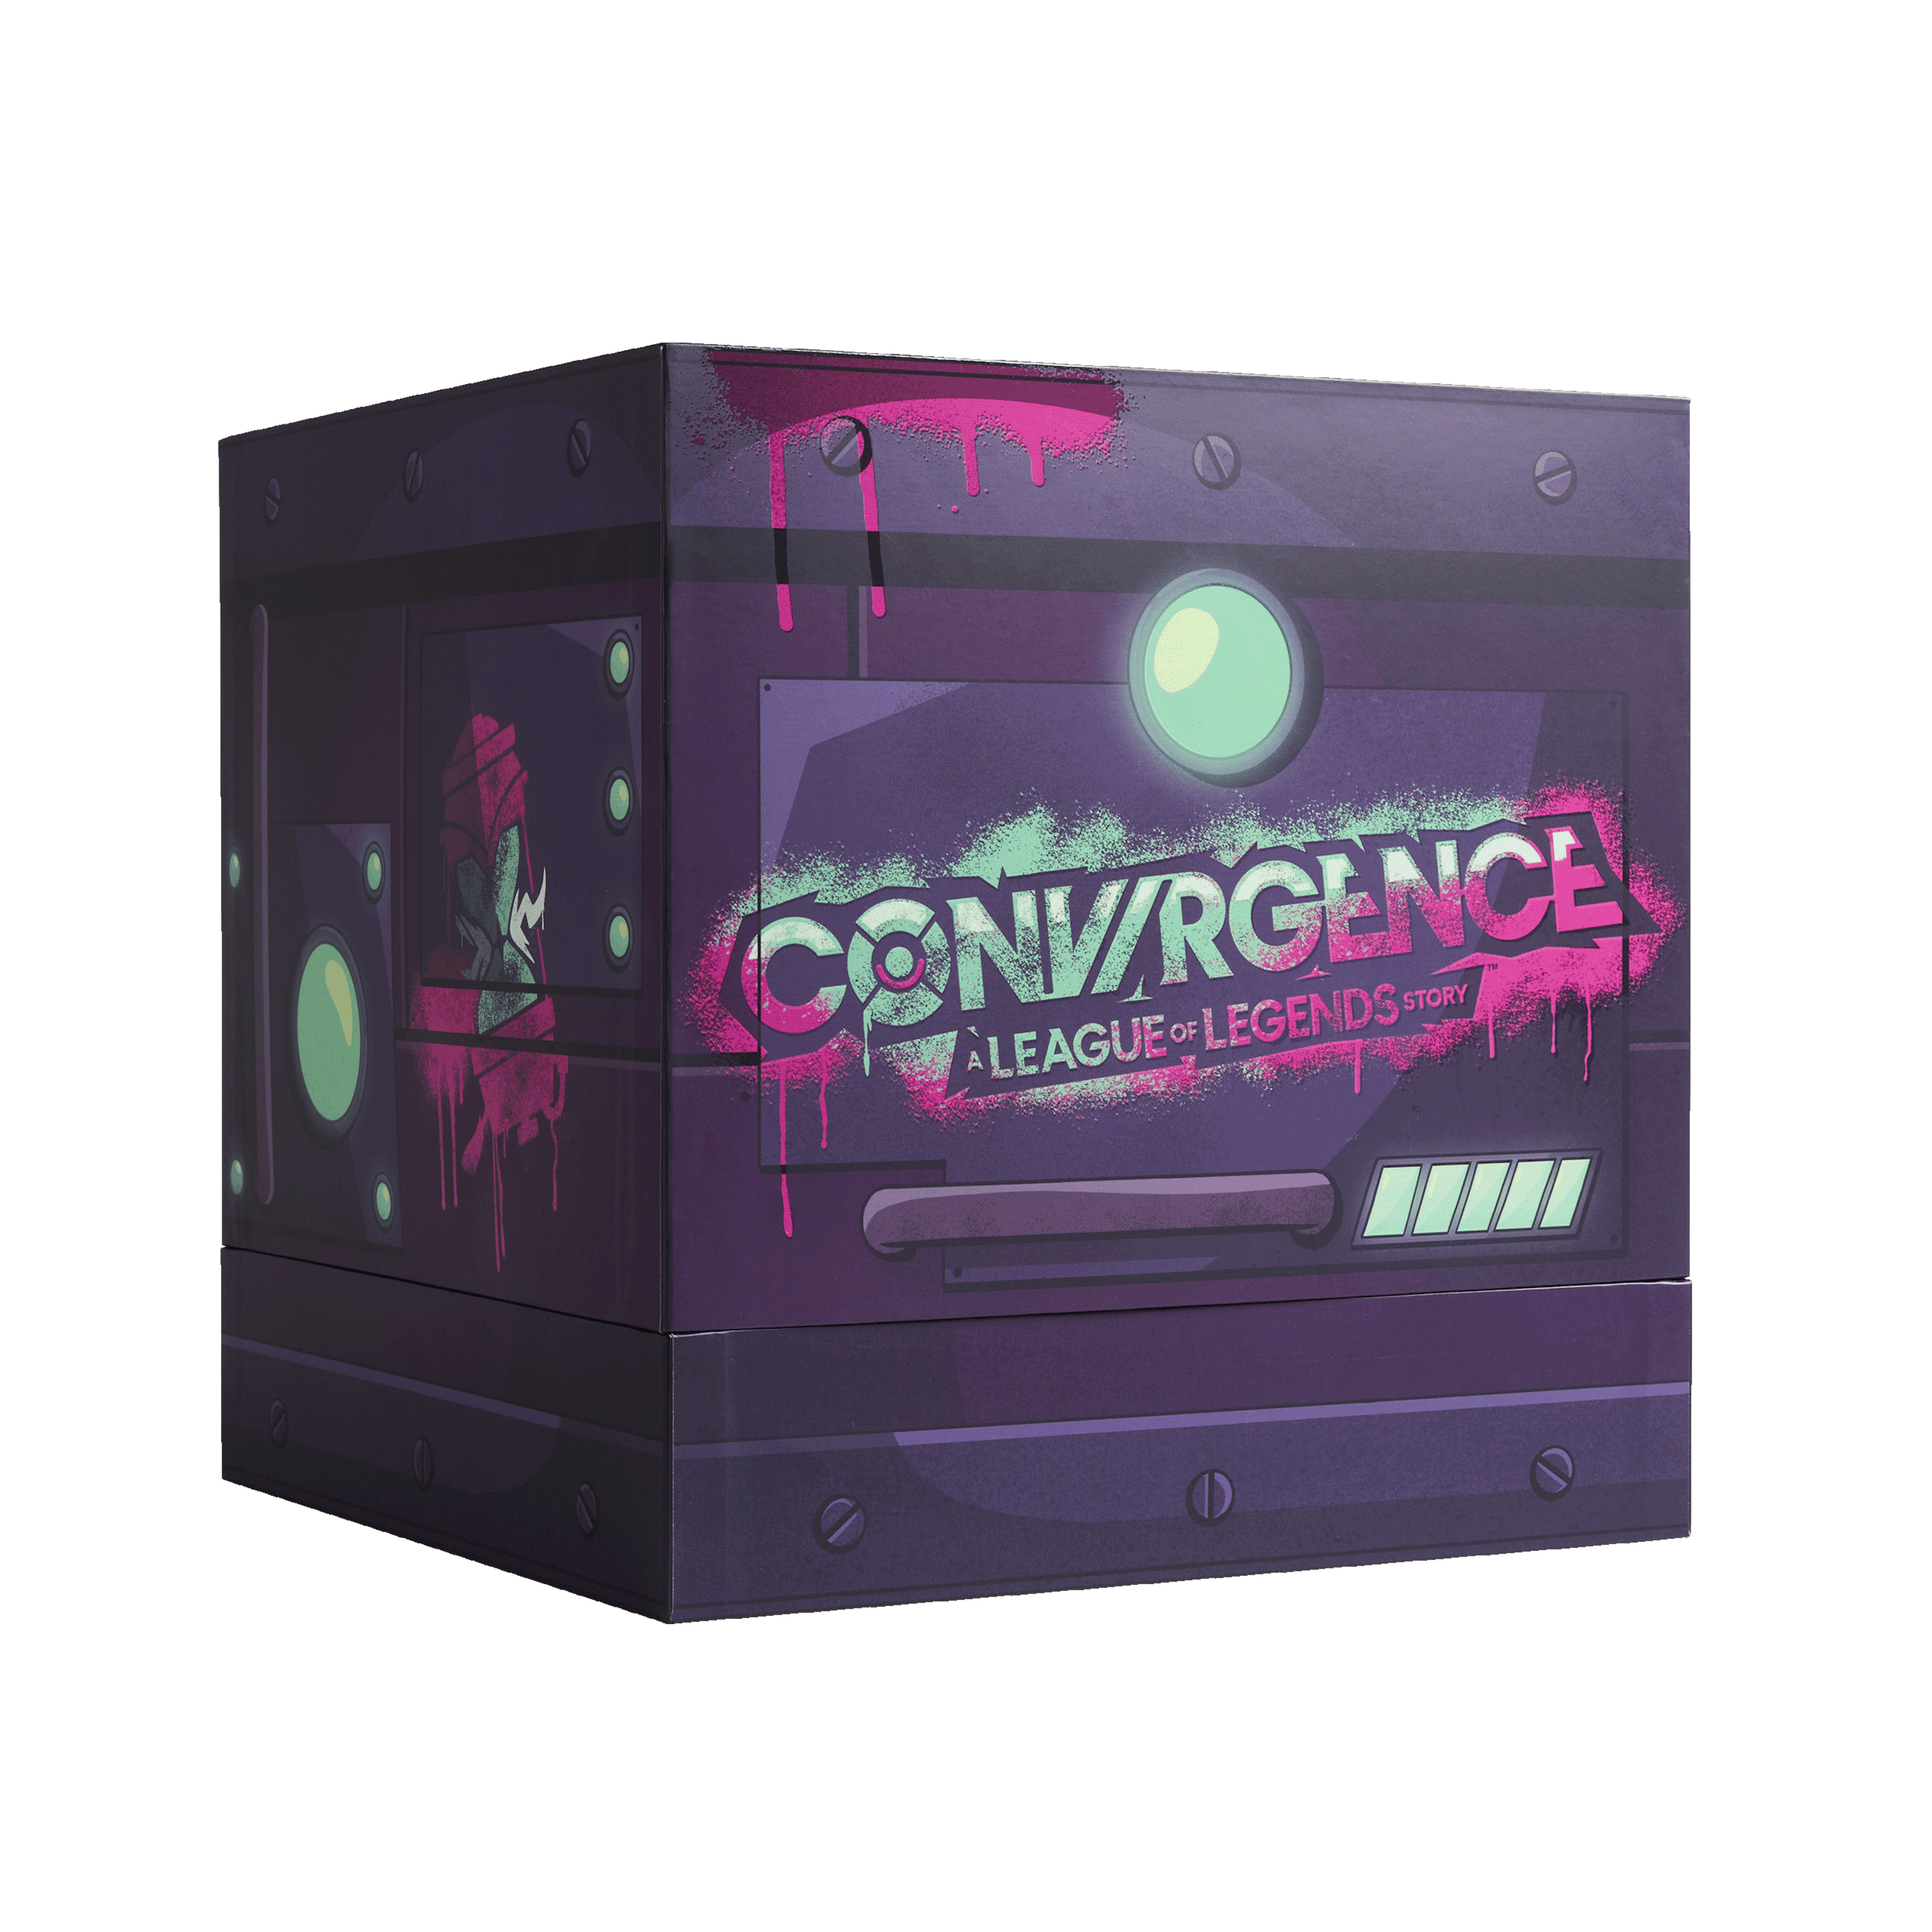 Convergence: A League of Legends Story Collector's Edition